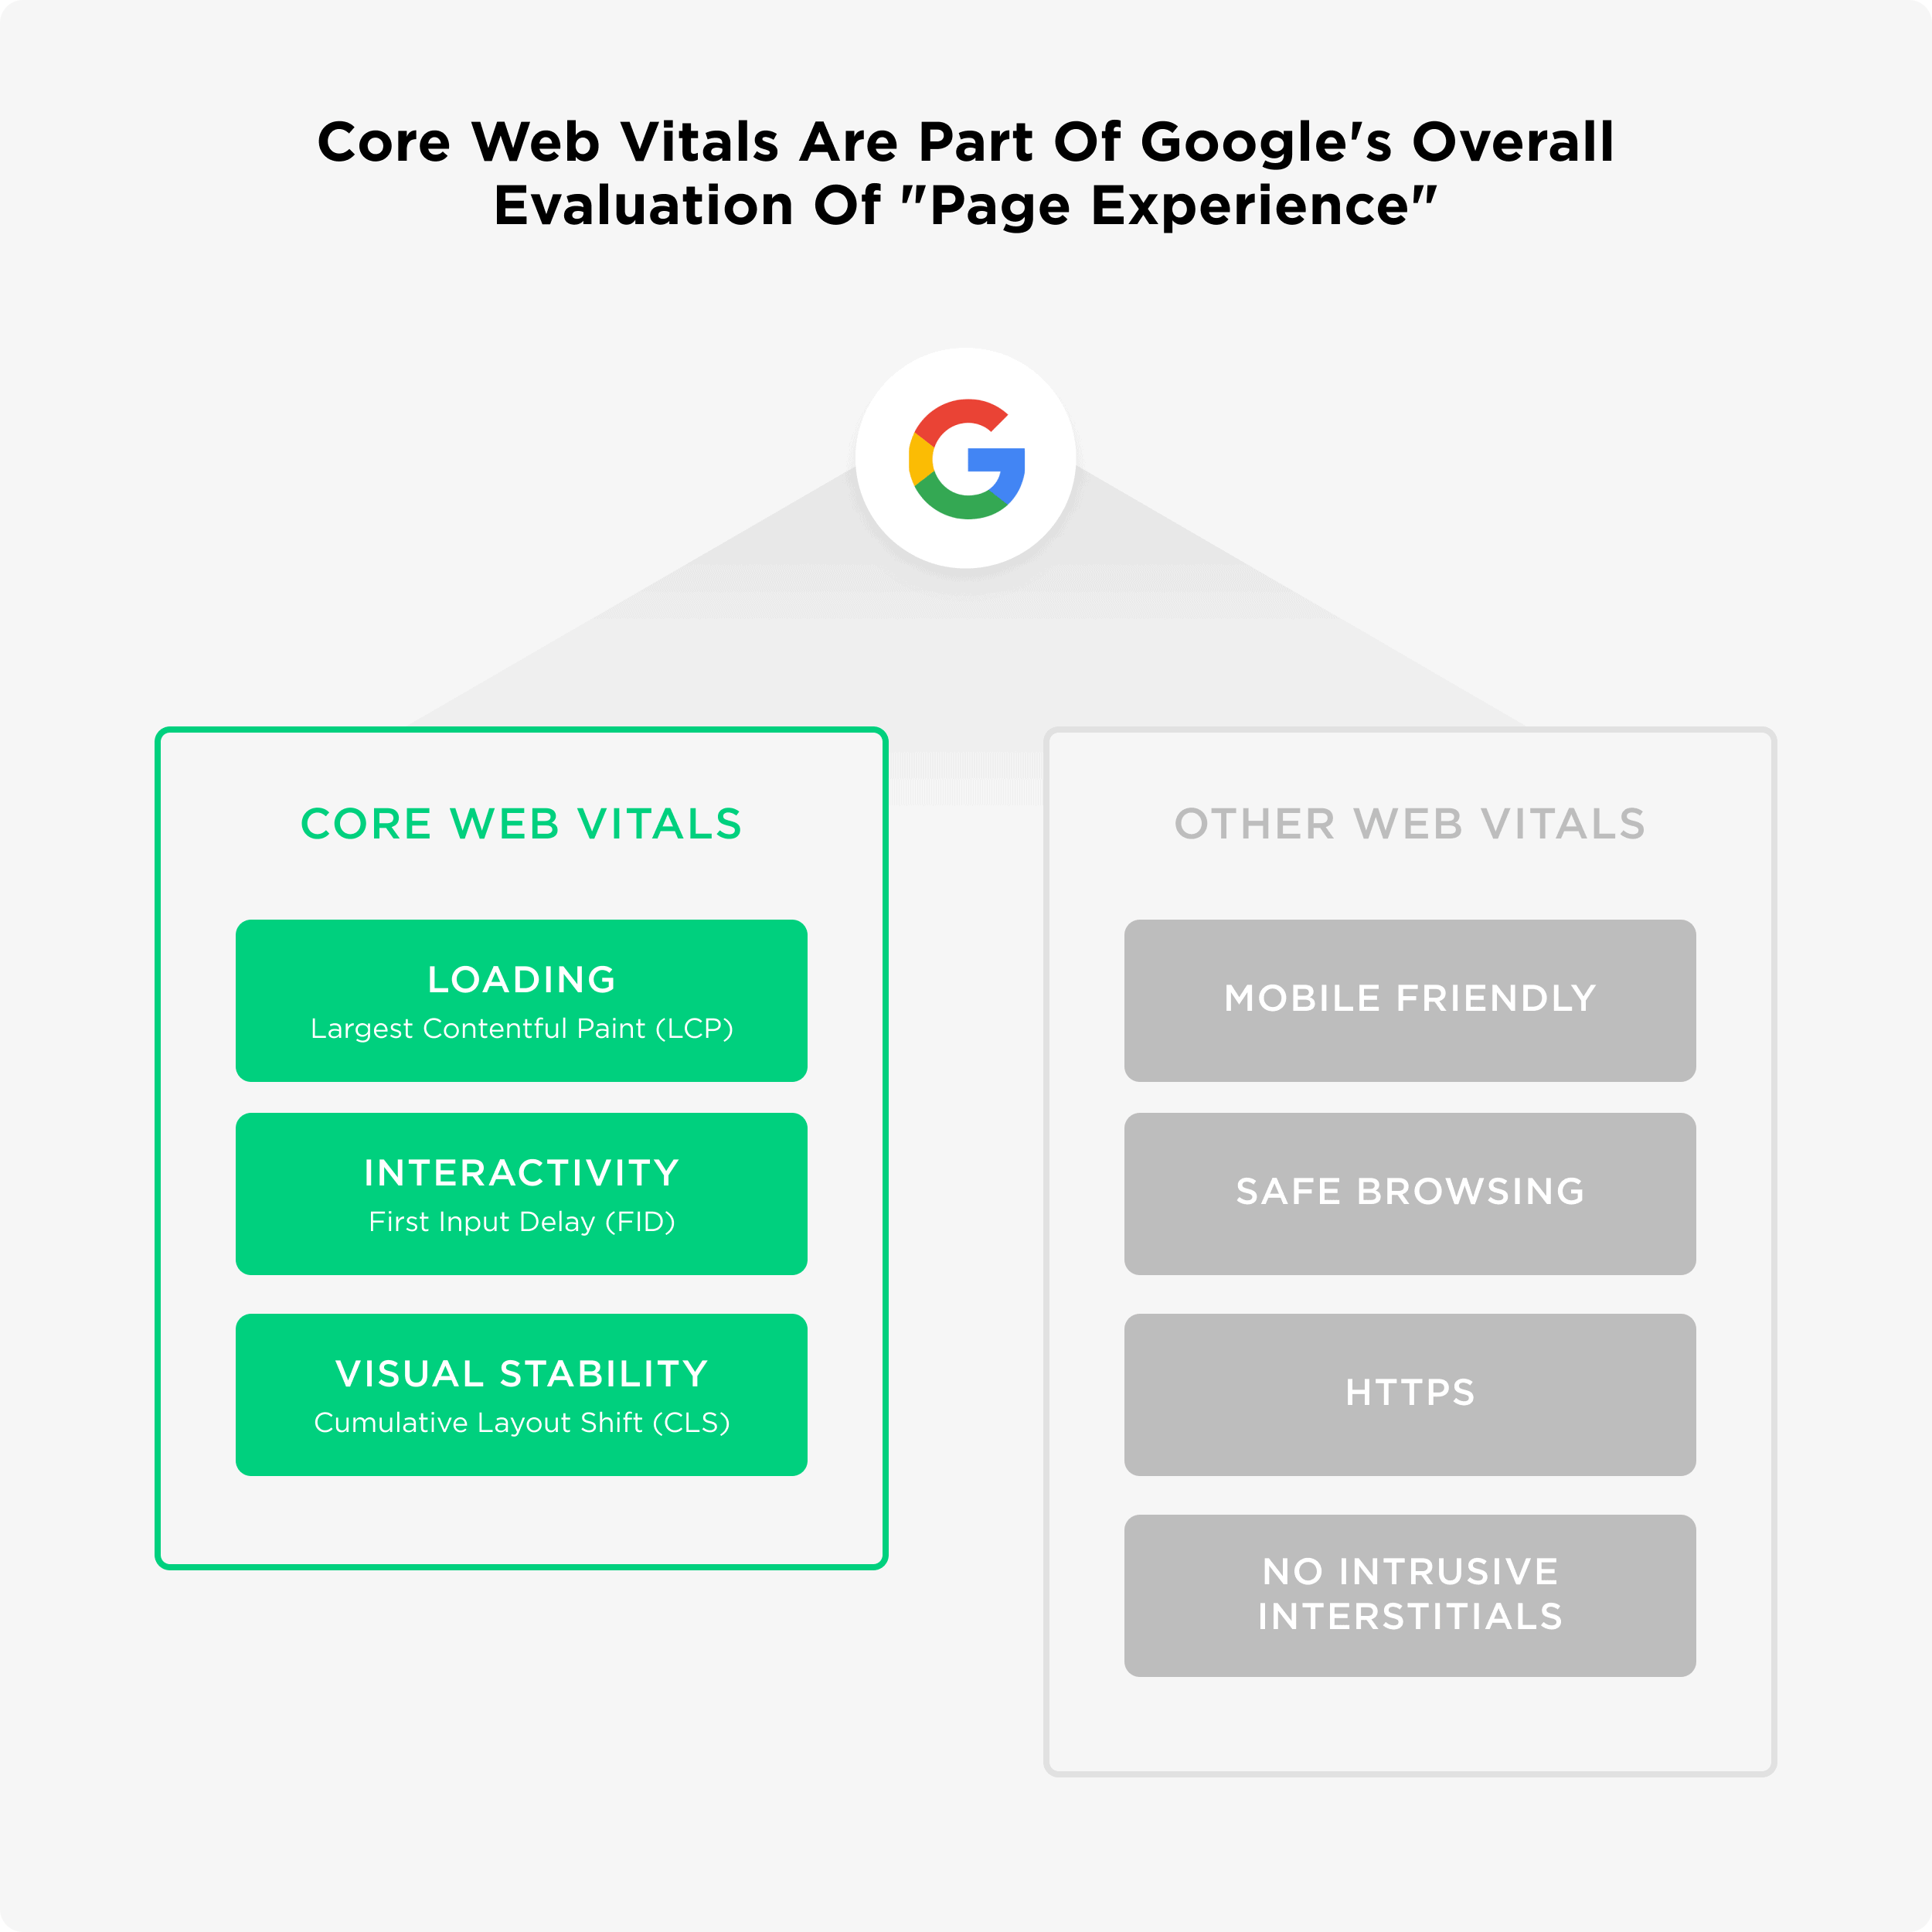 Core web vitals are part of Google's overall evaluation of "page experience"